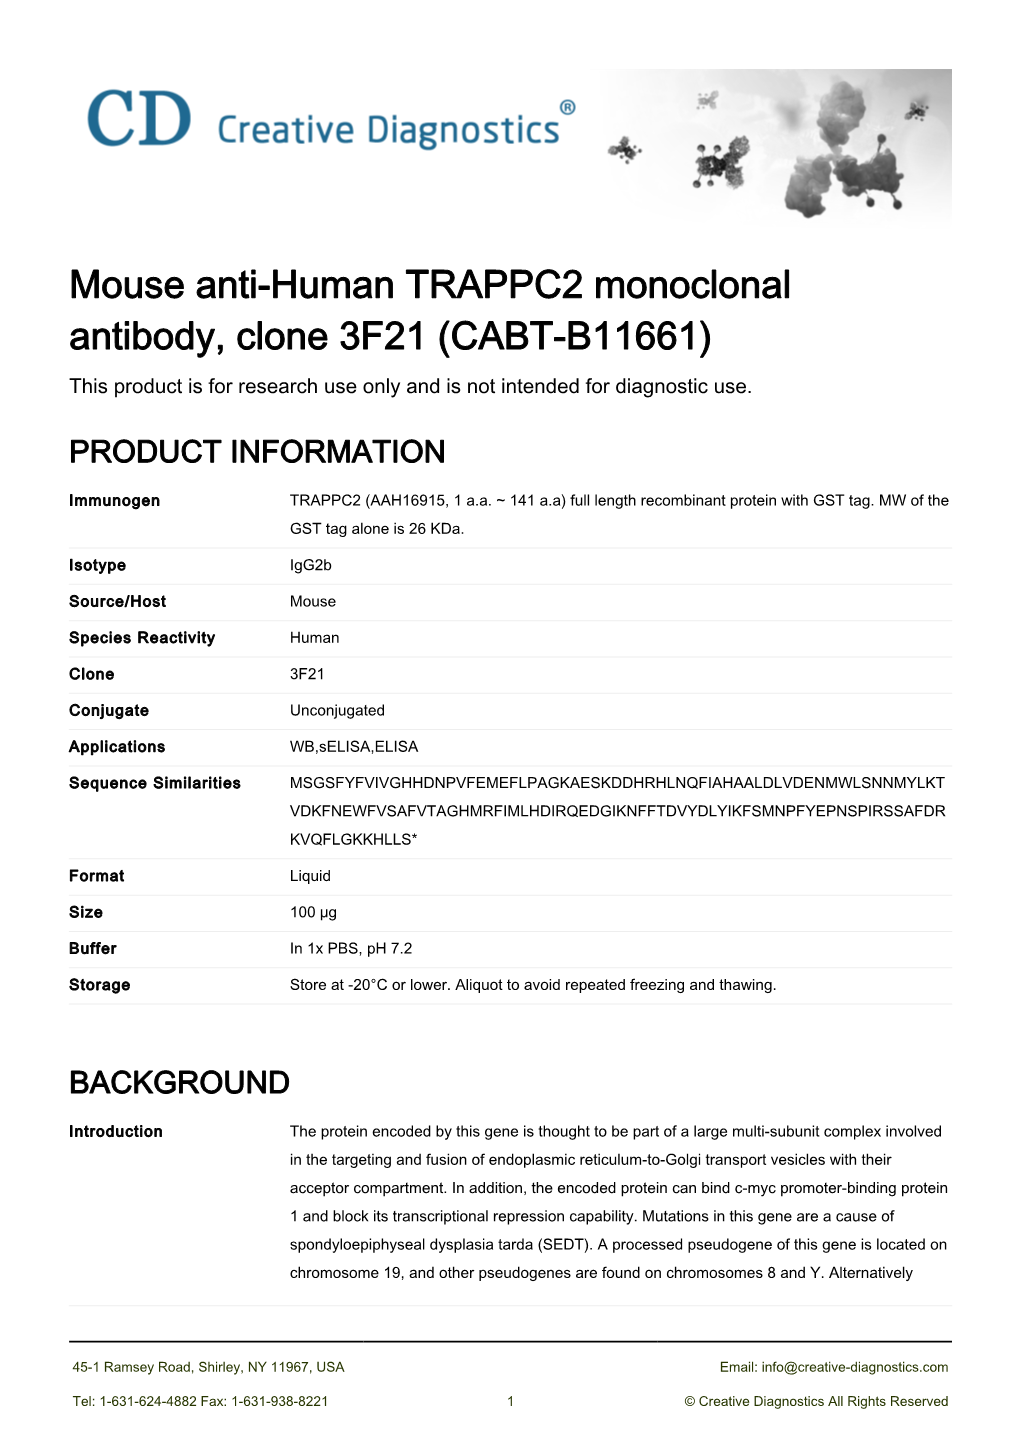 Mouse Anti-Human TRAPPC2 Monoclonal Antibody, Clone 3F21 (CABT-B11661) This Product Is for Research Use Only and Is Not Intended for Diagnostic Use